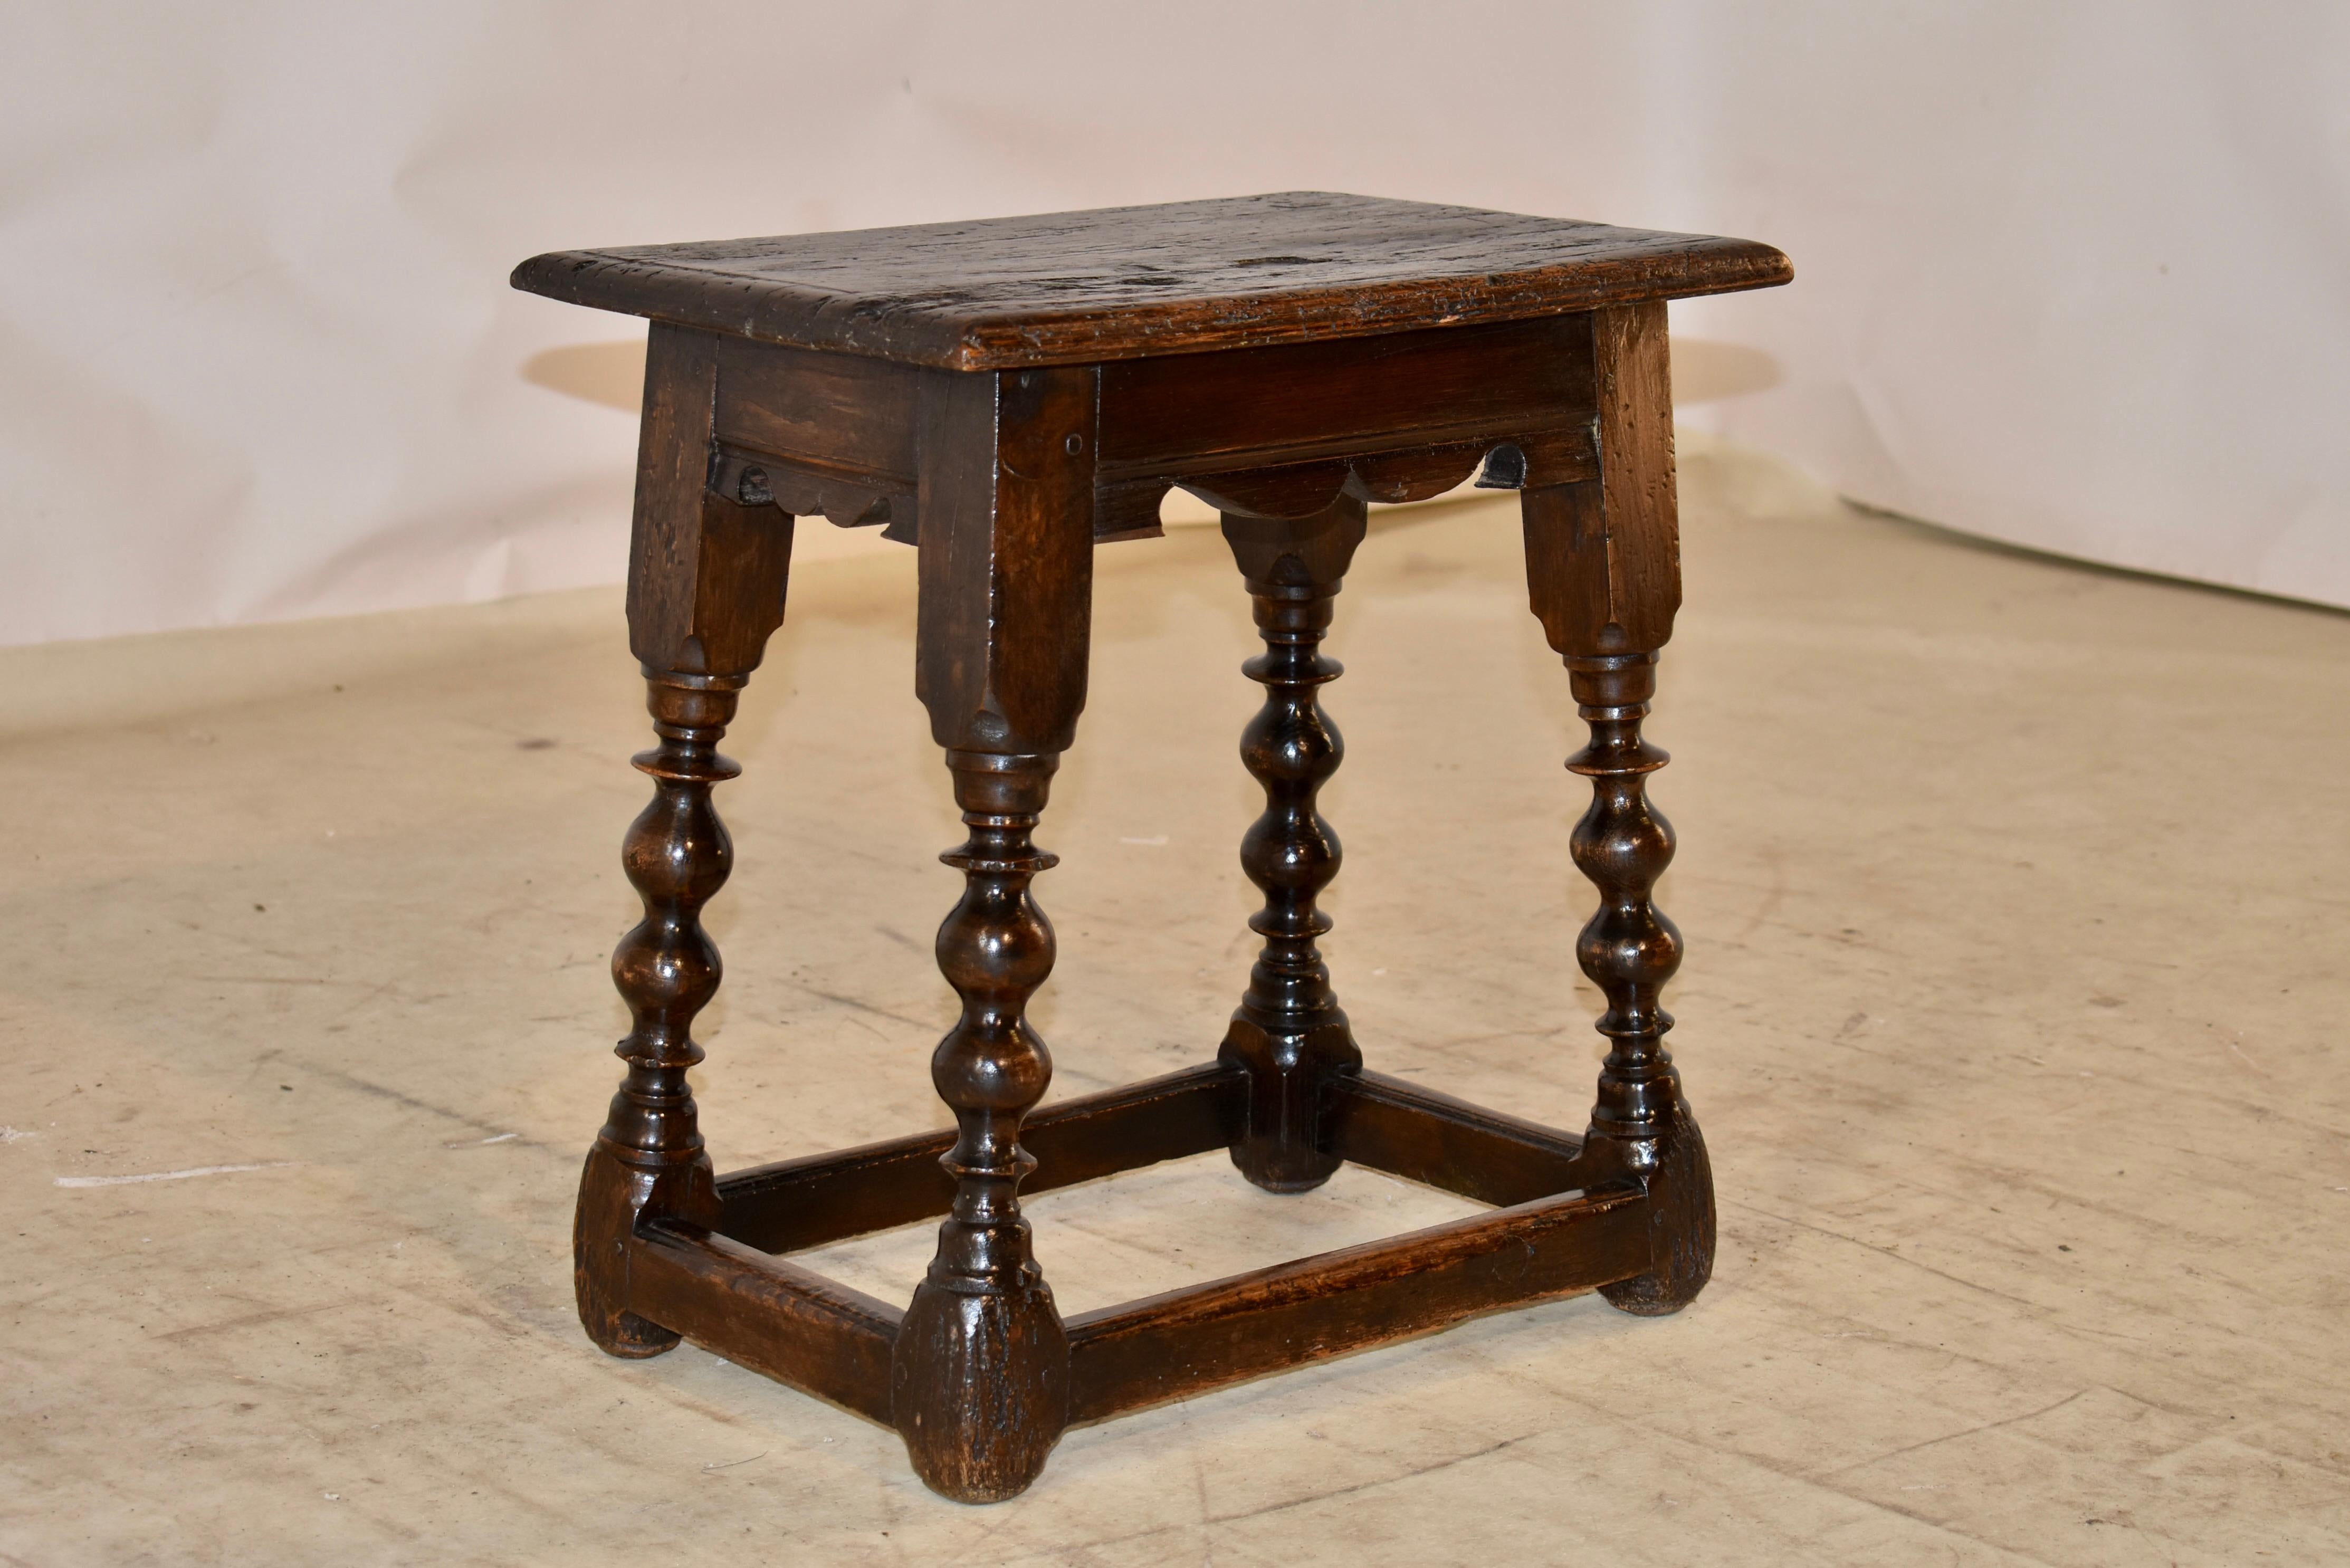 18th century George II period oak joint stool with a well worn top from age and use, which has a beveled edge.  The top is over a scalloped apron.  The stool is supported on hand turned and splayed legs, joined by simple stretchers.  the stool has